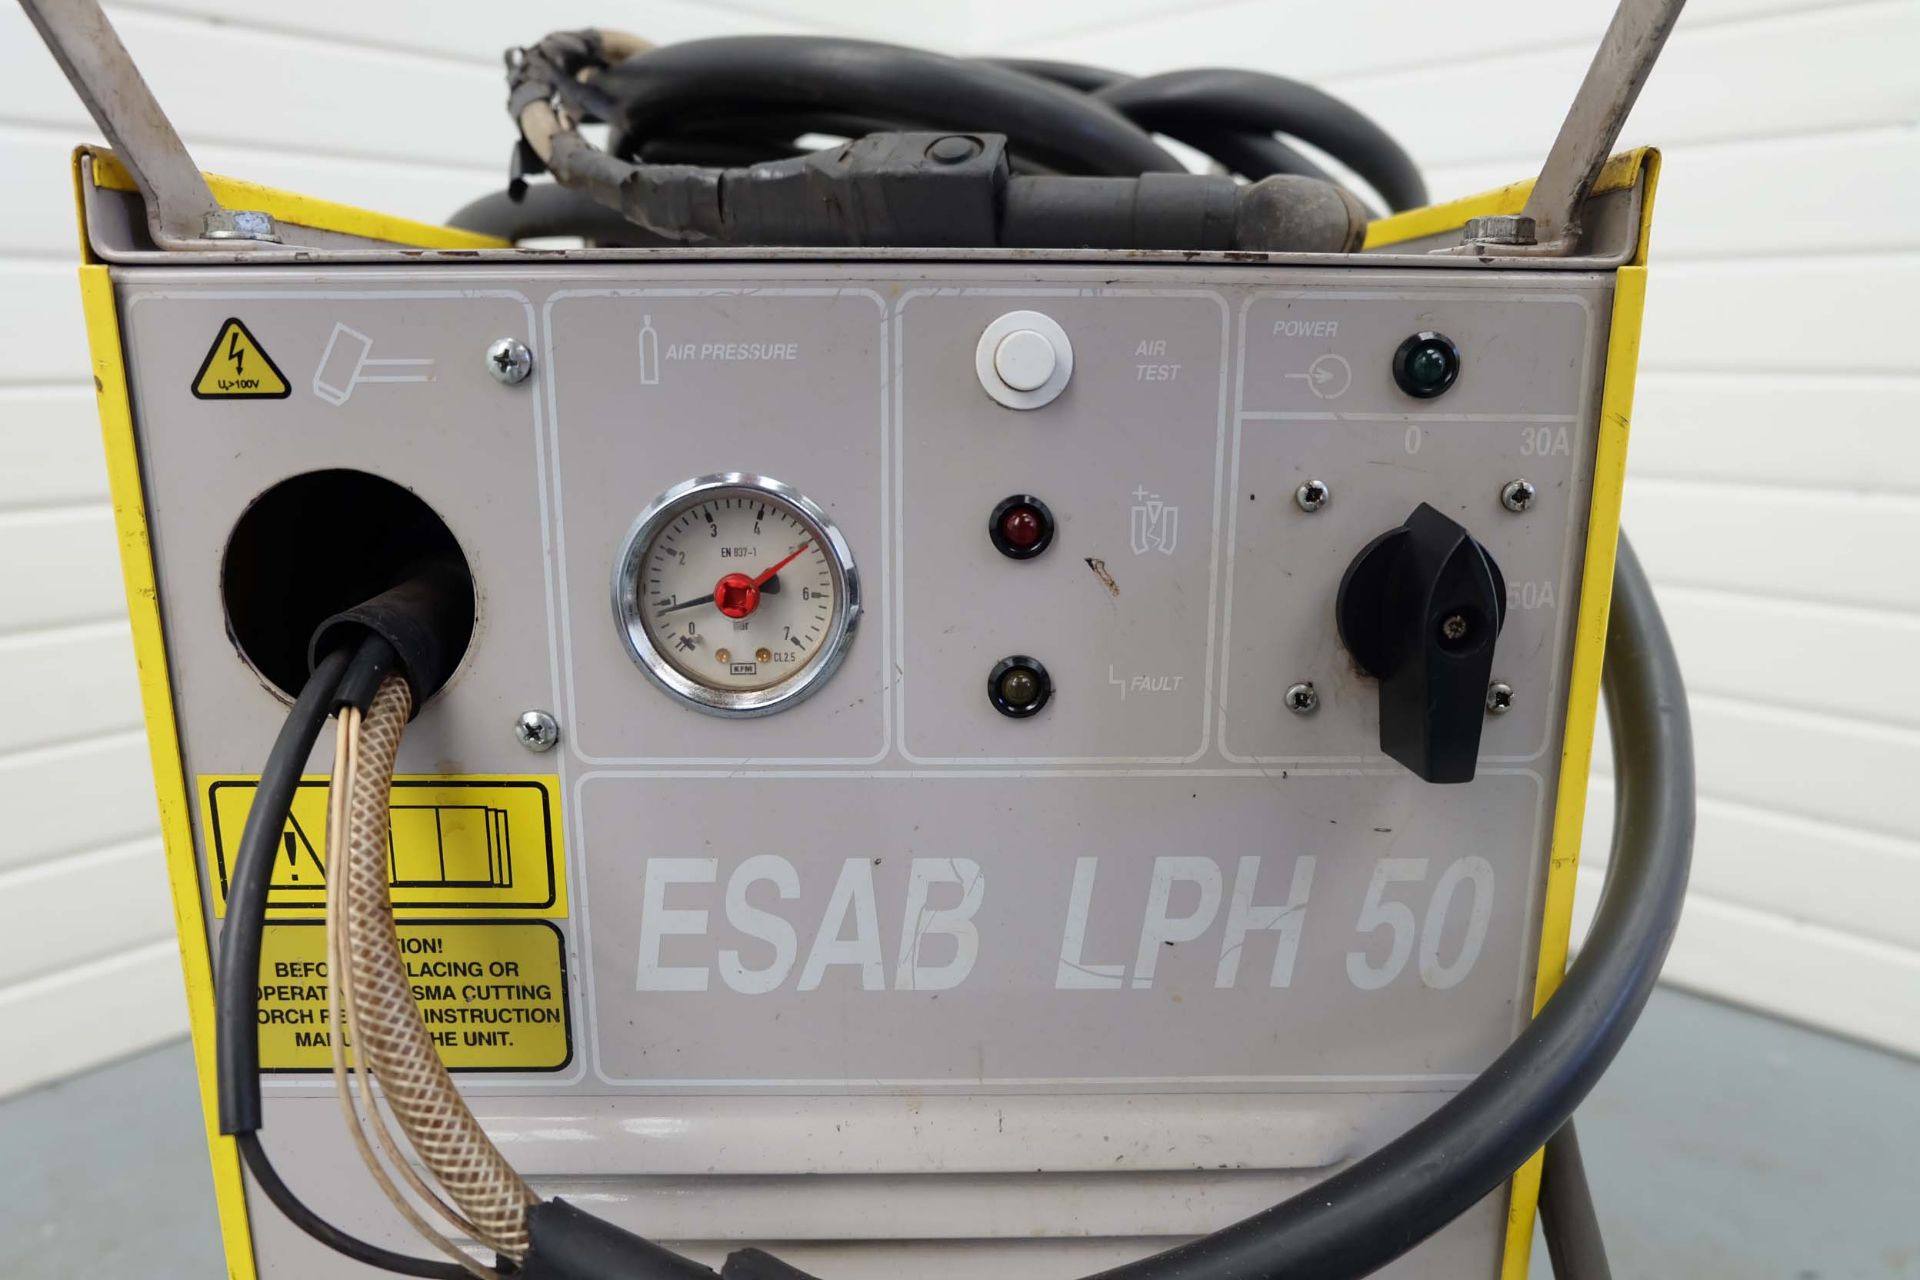 ESAB LPH 50 Mobile Mig Welding Set. 50 Amp @ 60% Duty Cycle. 30 Amp @ 100% Duty Cycle. - Image 3 of 6